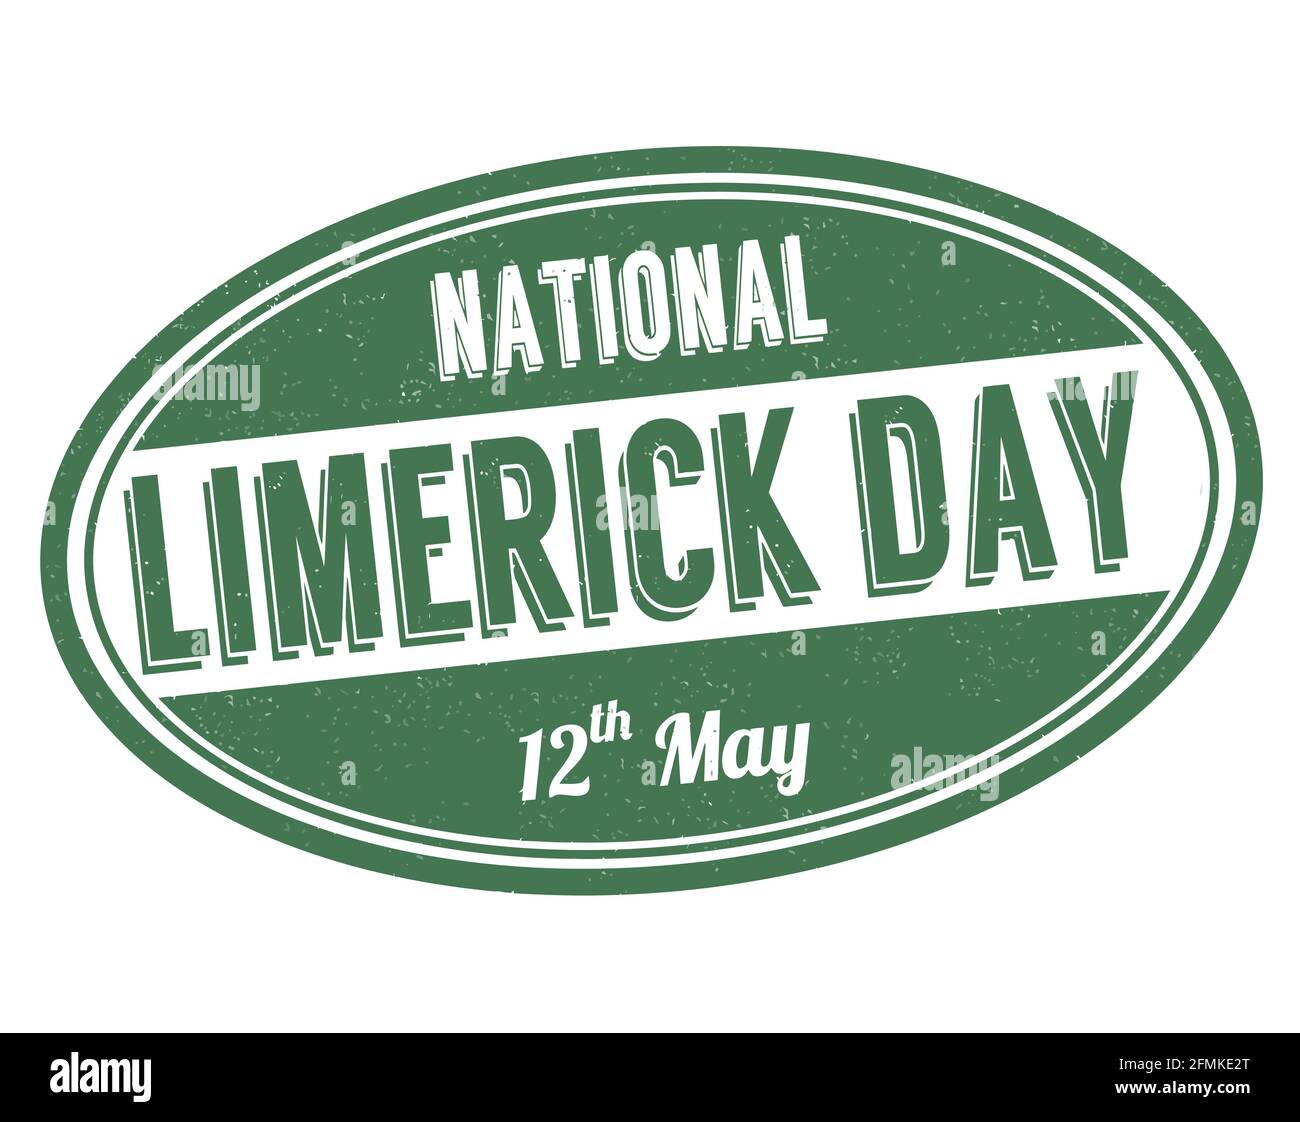 National Limerick day grunge rubber stamp on white background, vector